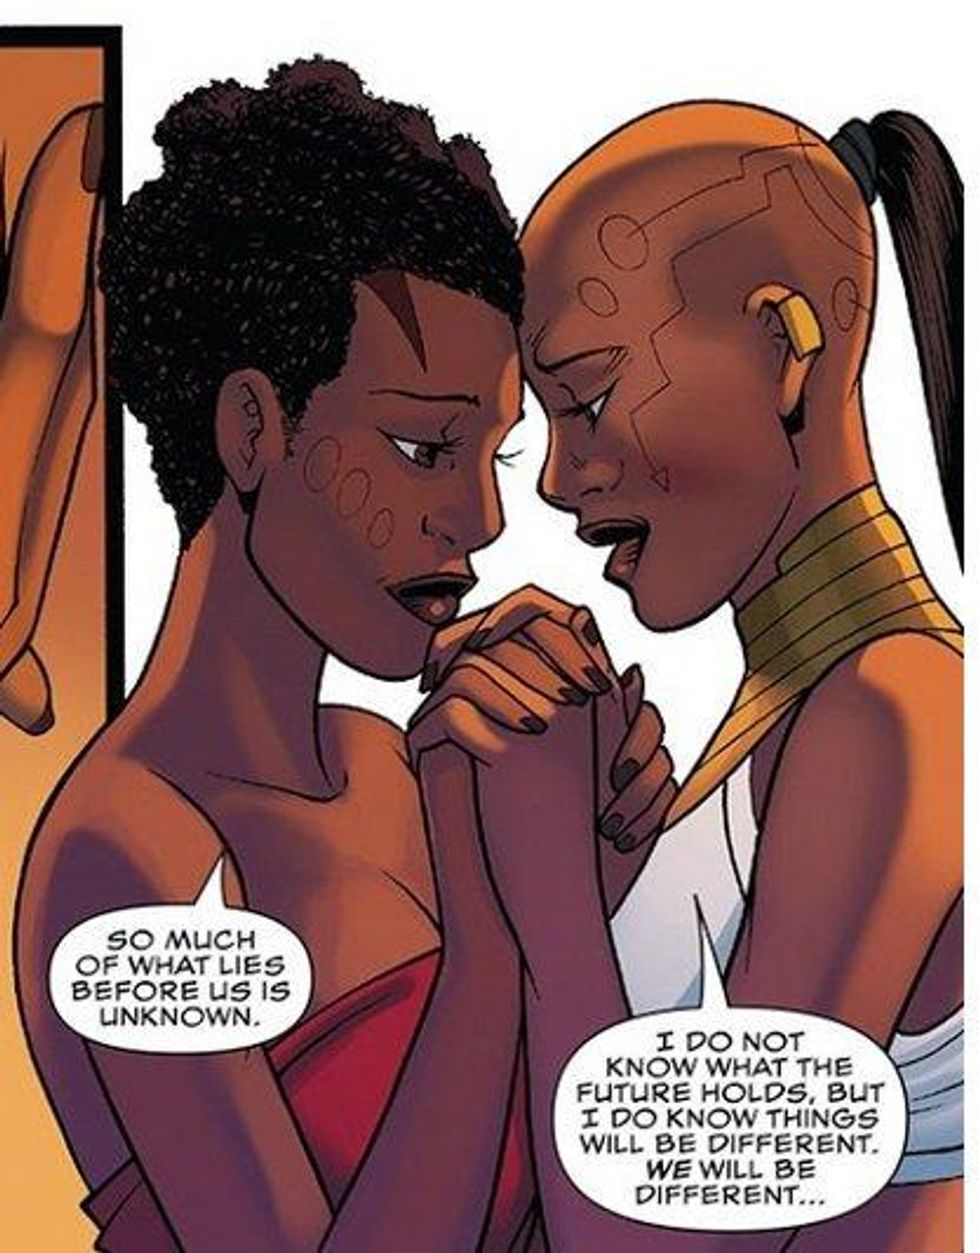 Black Panther Cartoon Porn - The 'Black Panther' Lesbian Romance That Almost Was